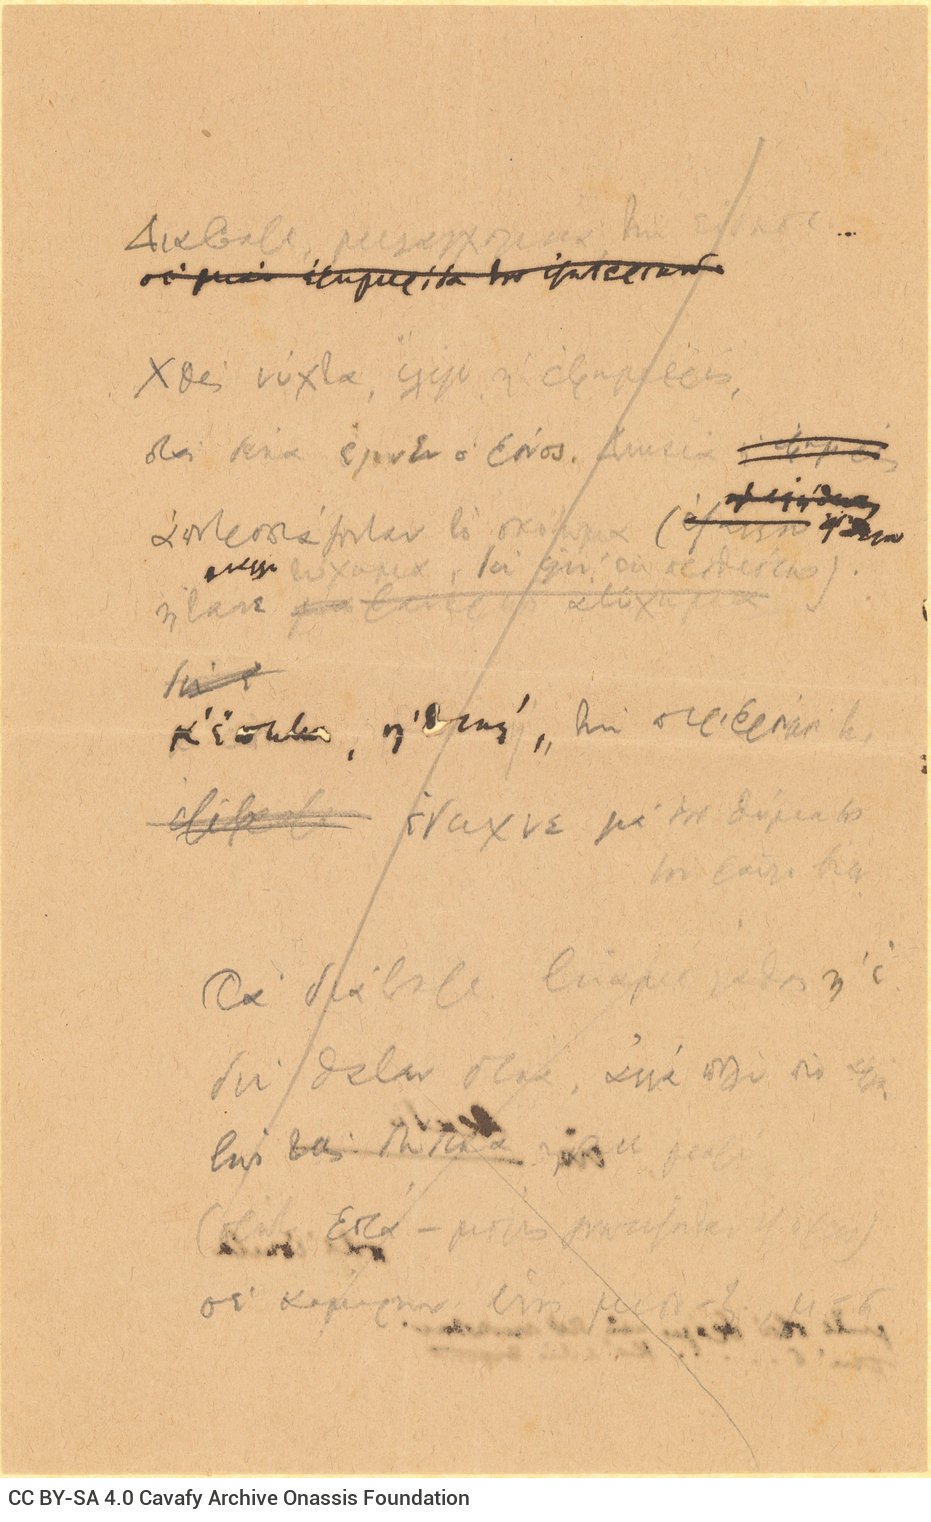 Handwritten draft of the poem "The Item in the Paper" on both sides of three loose sheets and of one ruled sheet. The titl